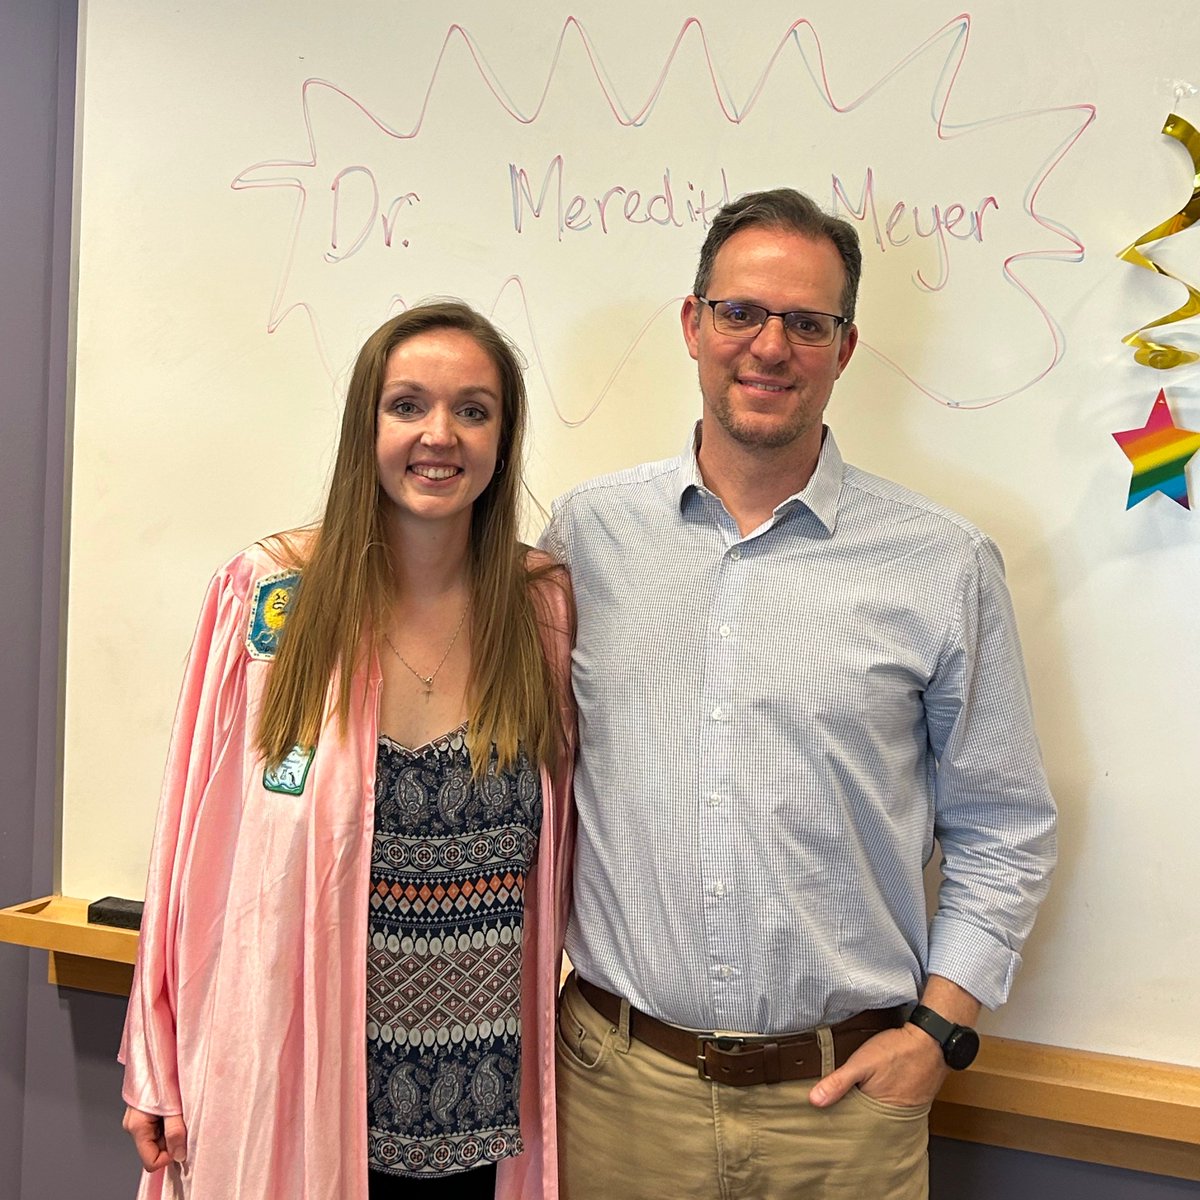 Congratulations to Meredith Meyer who recently defended her Ph.D dissertation titled 'The Influence of Phytoplankton Productivity and Molecular Physiology on Biogeochemical Dynamics of Two Contrasting Ocean Environments'. Way to go Dr. Meyer!